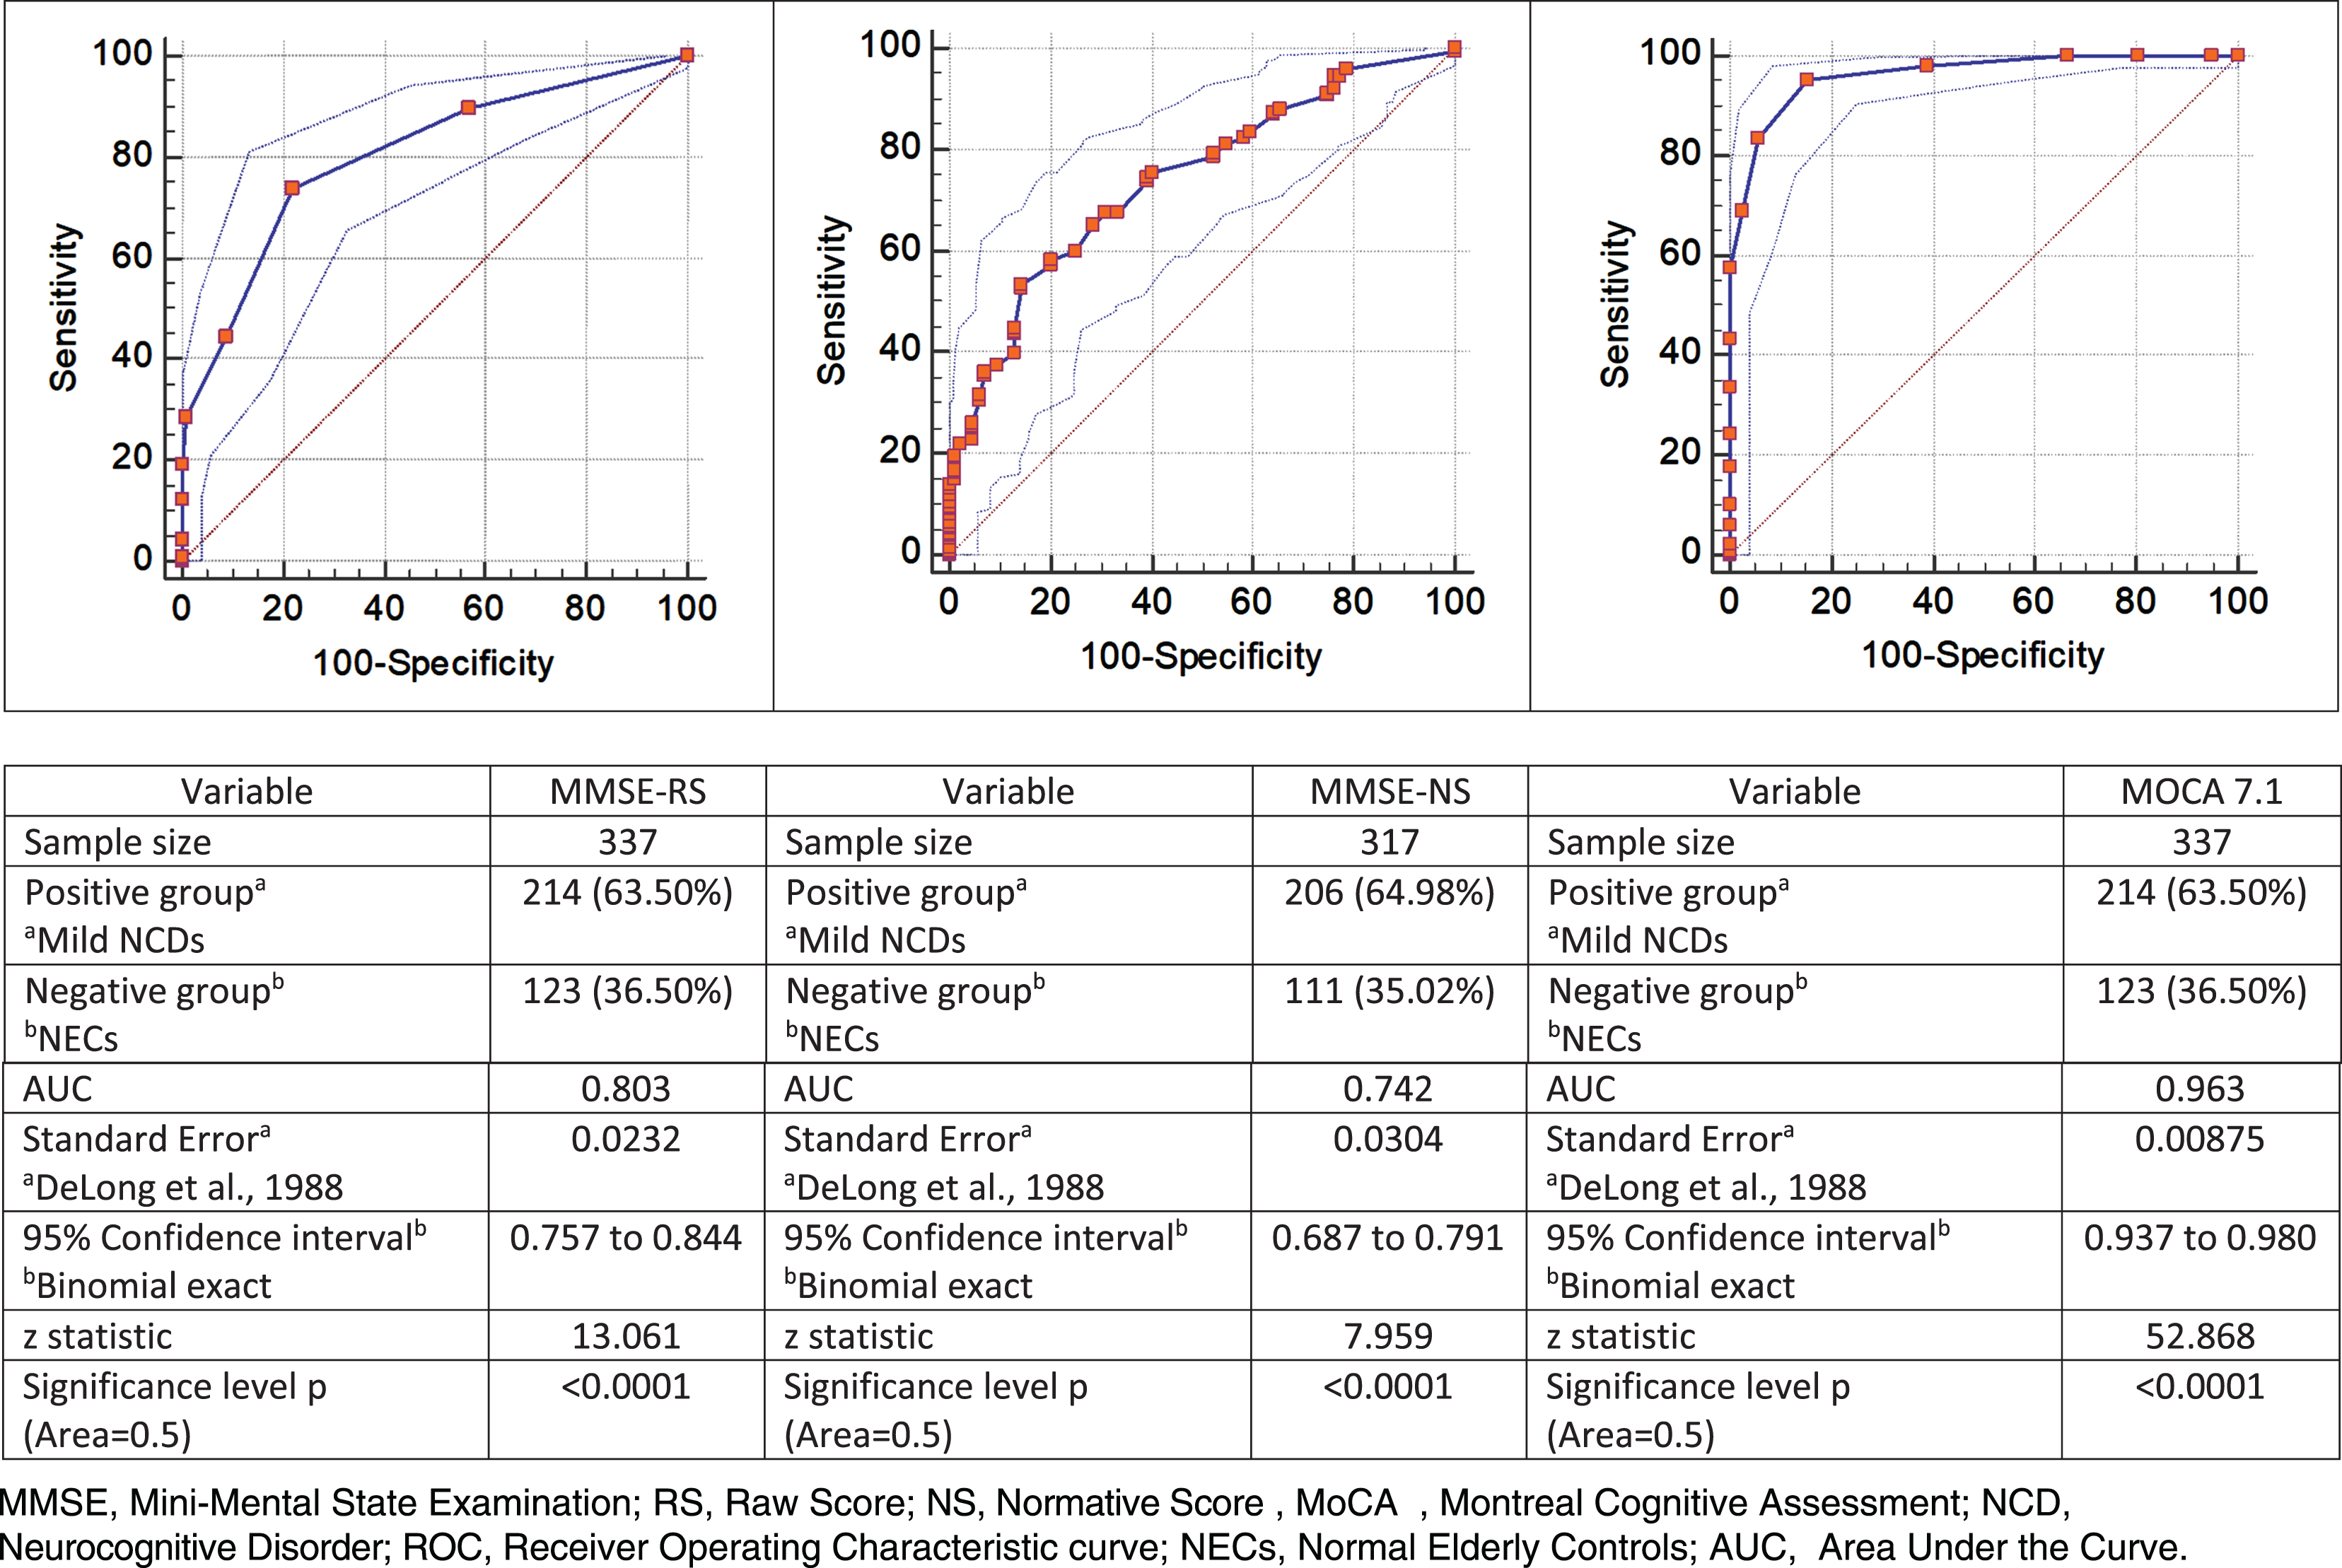 Normal versus Mild NCD. ROC curve, MMSE raw and normative scores and MOCA 7.1.